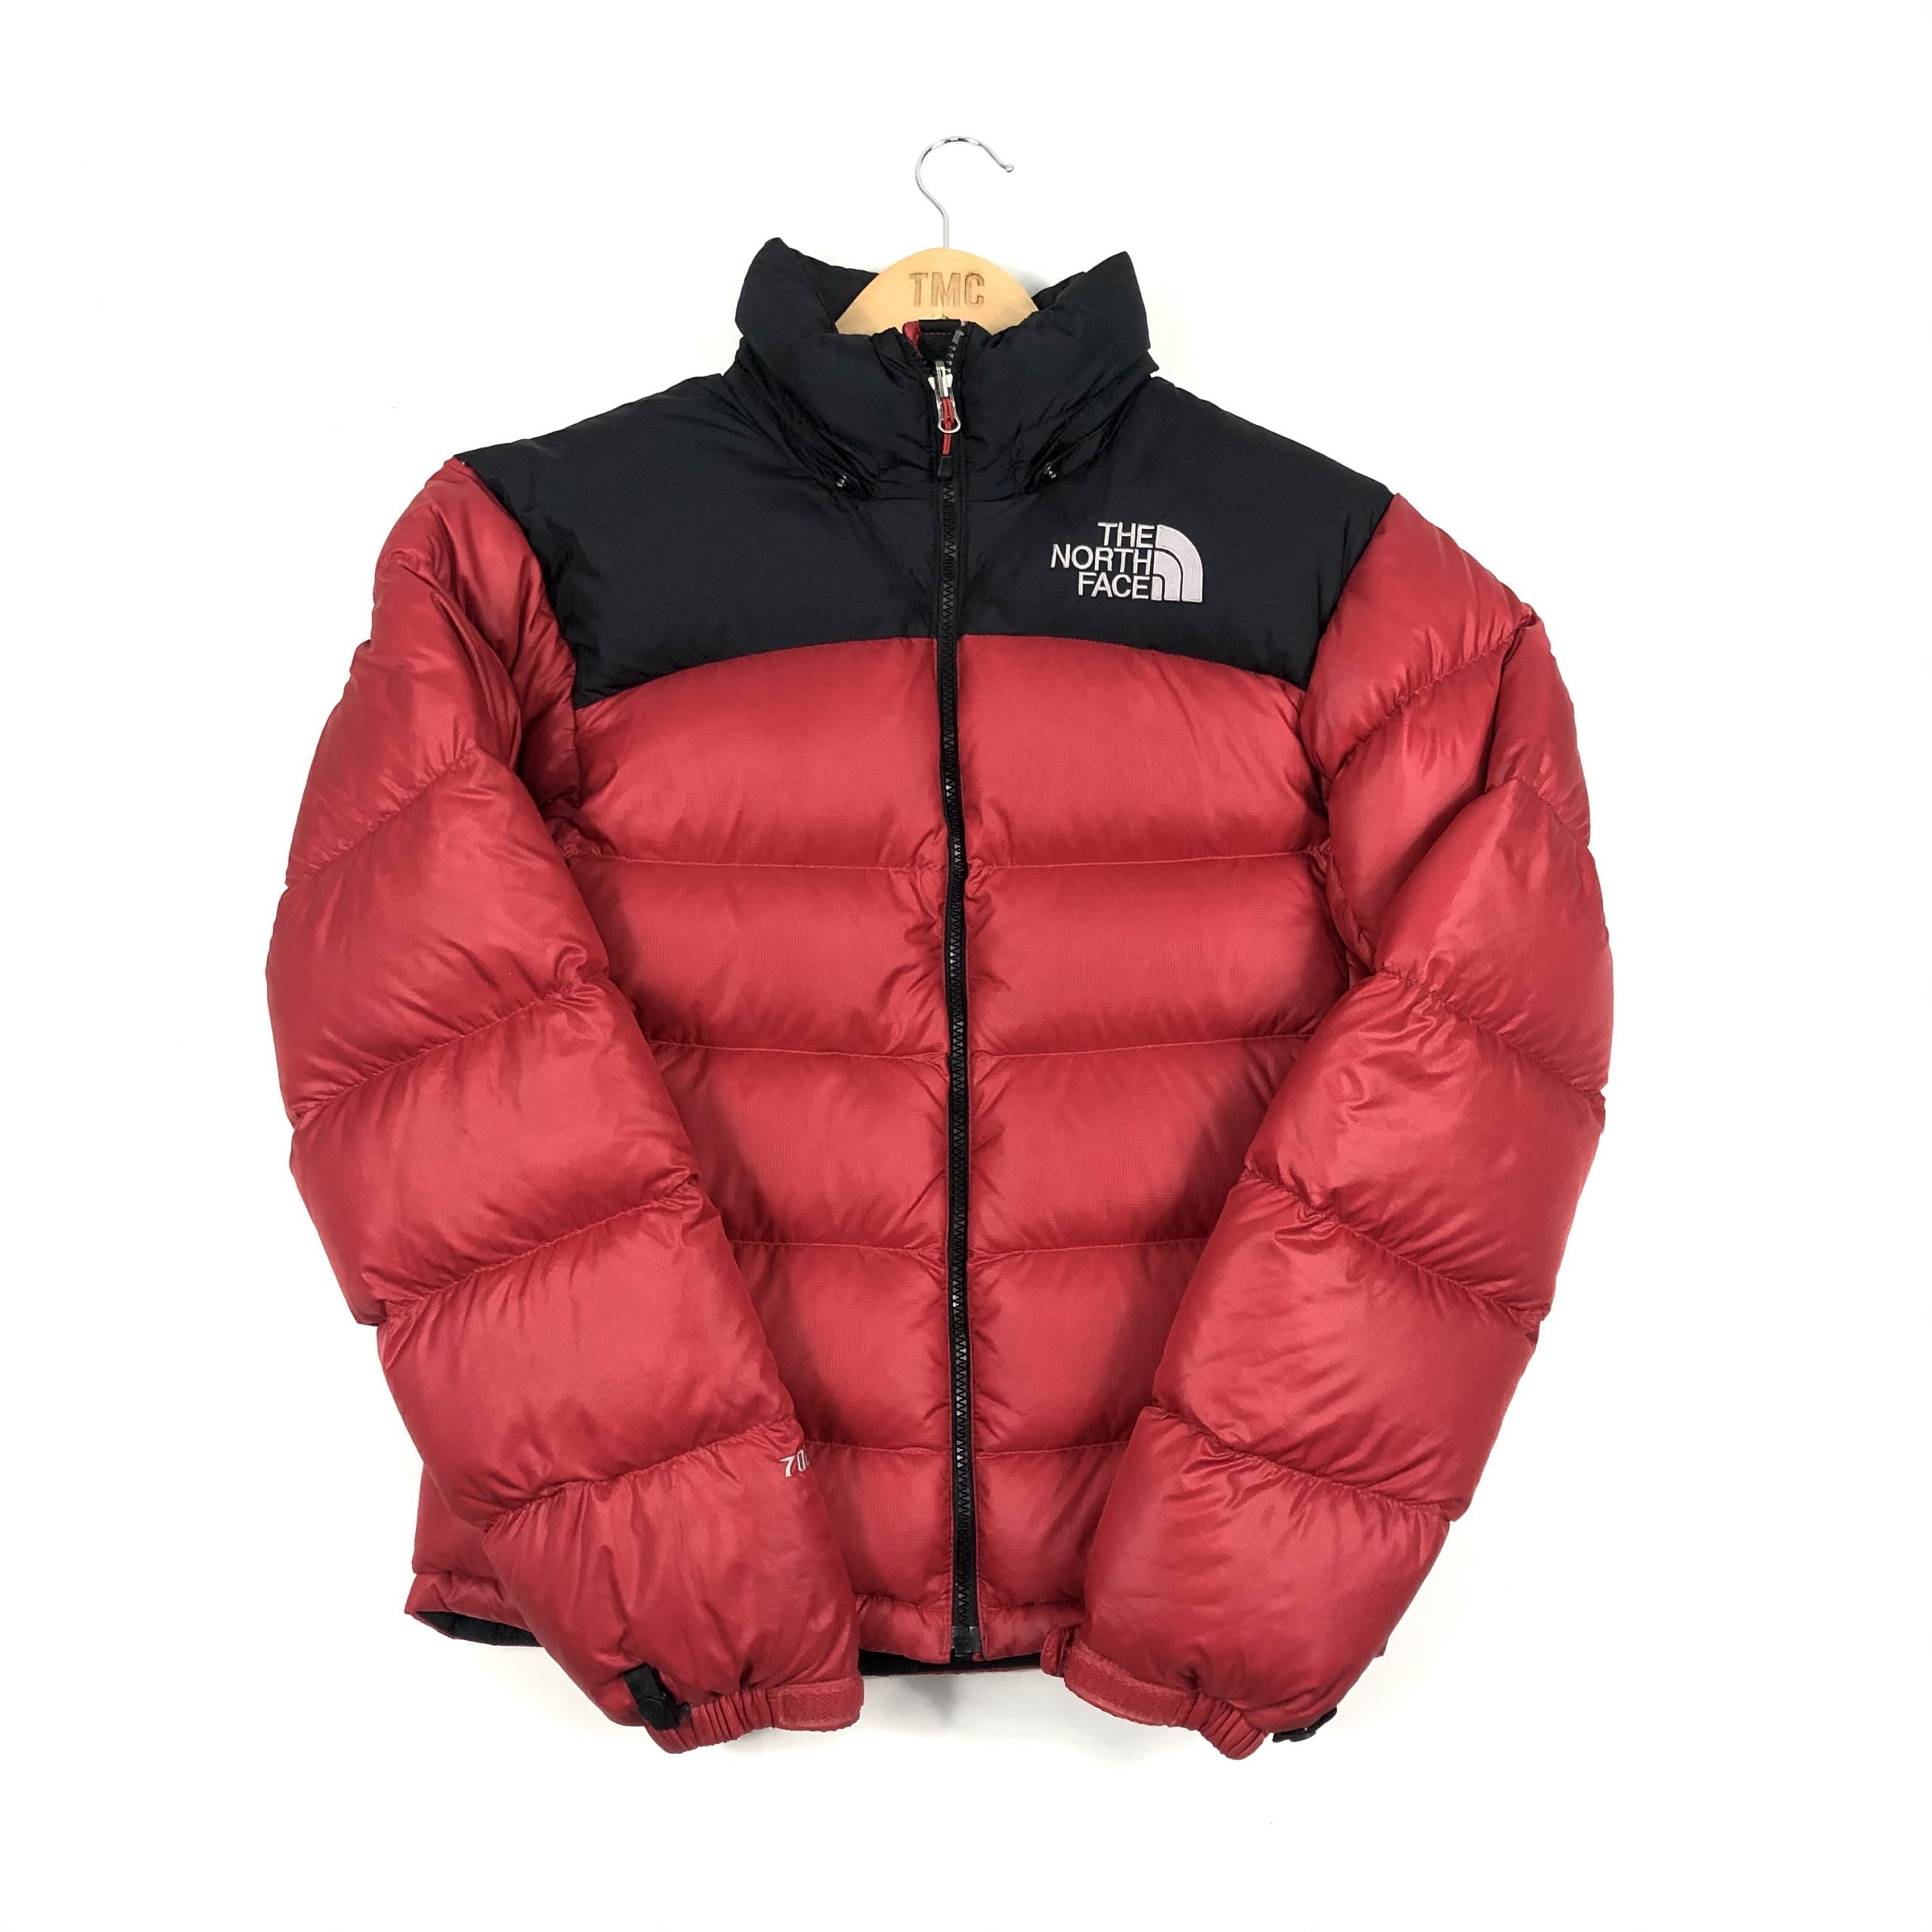 The North Face Nuptse 700 Down Jacket - Red - XS - TMC Vintage